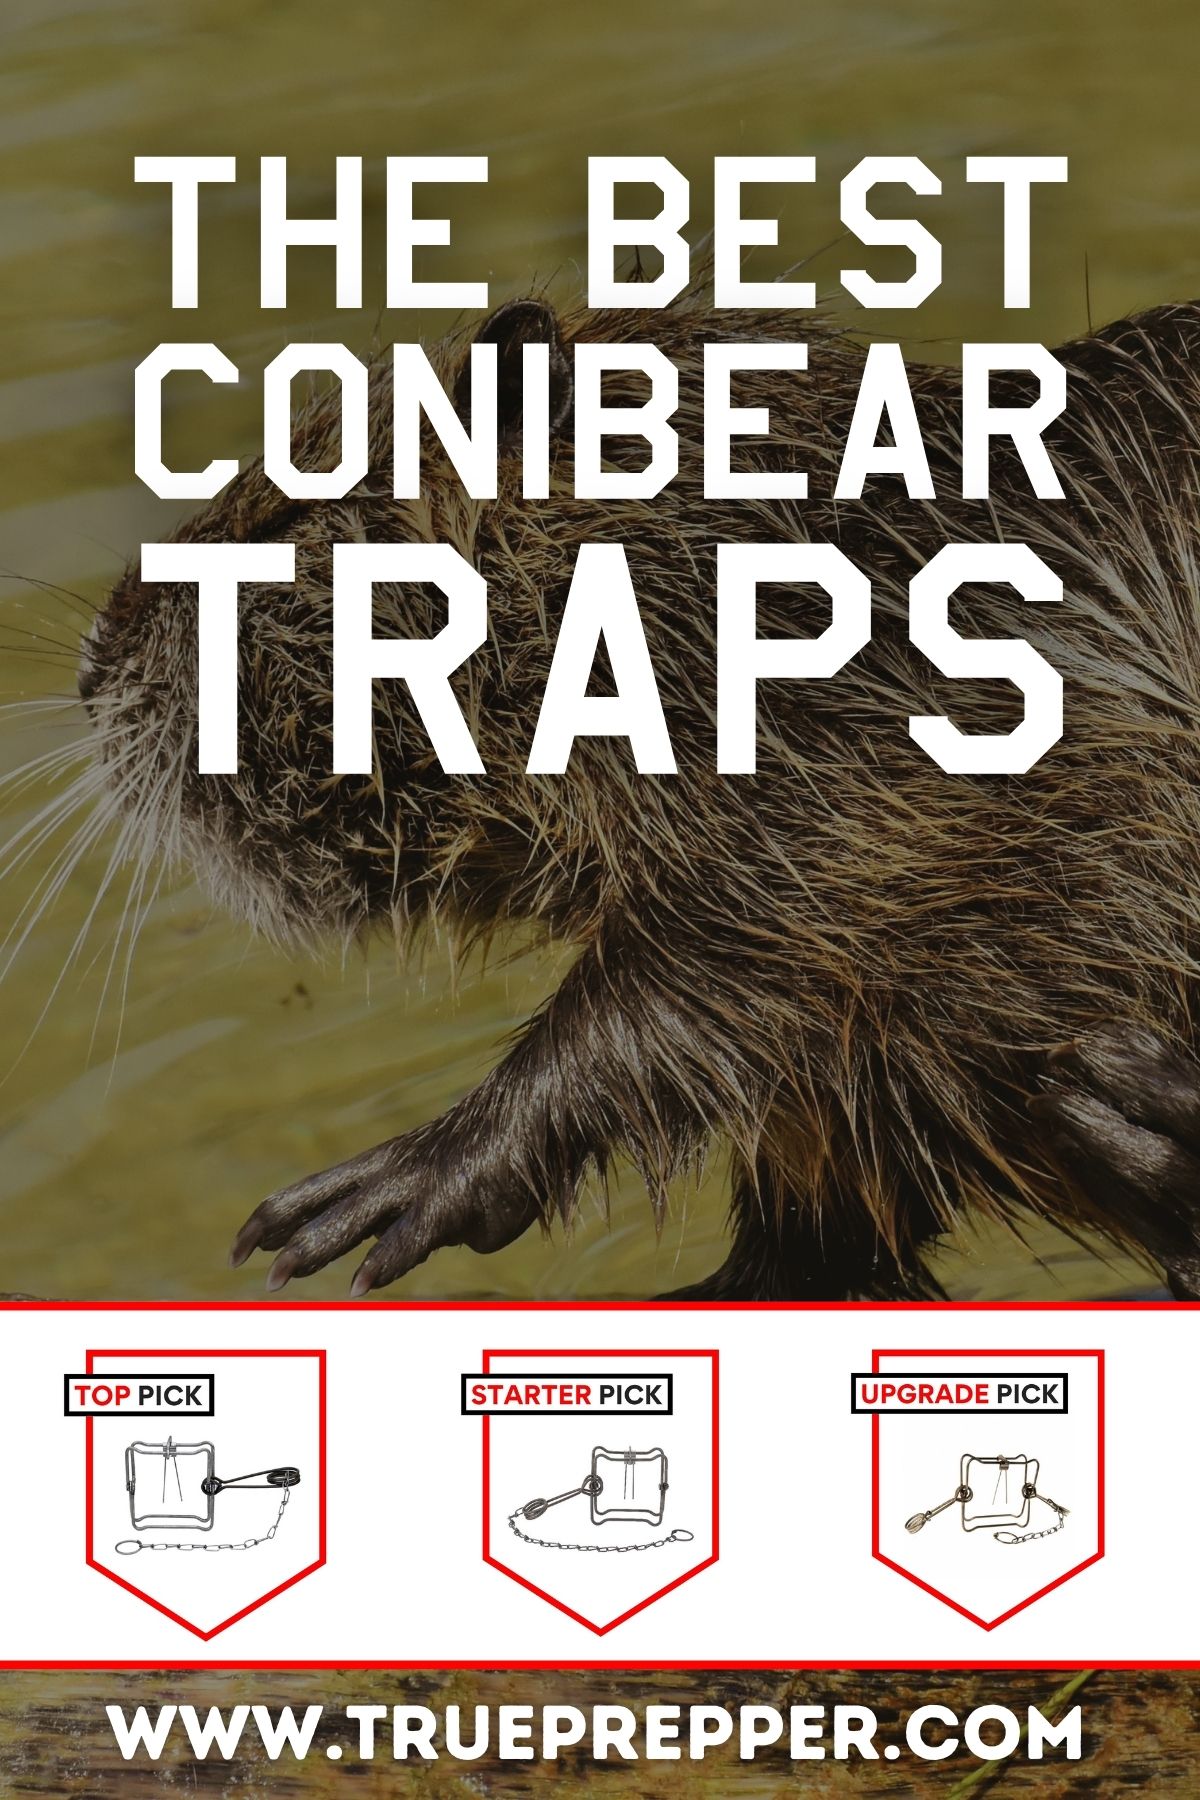 The Best Conibear Traps